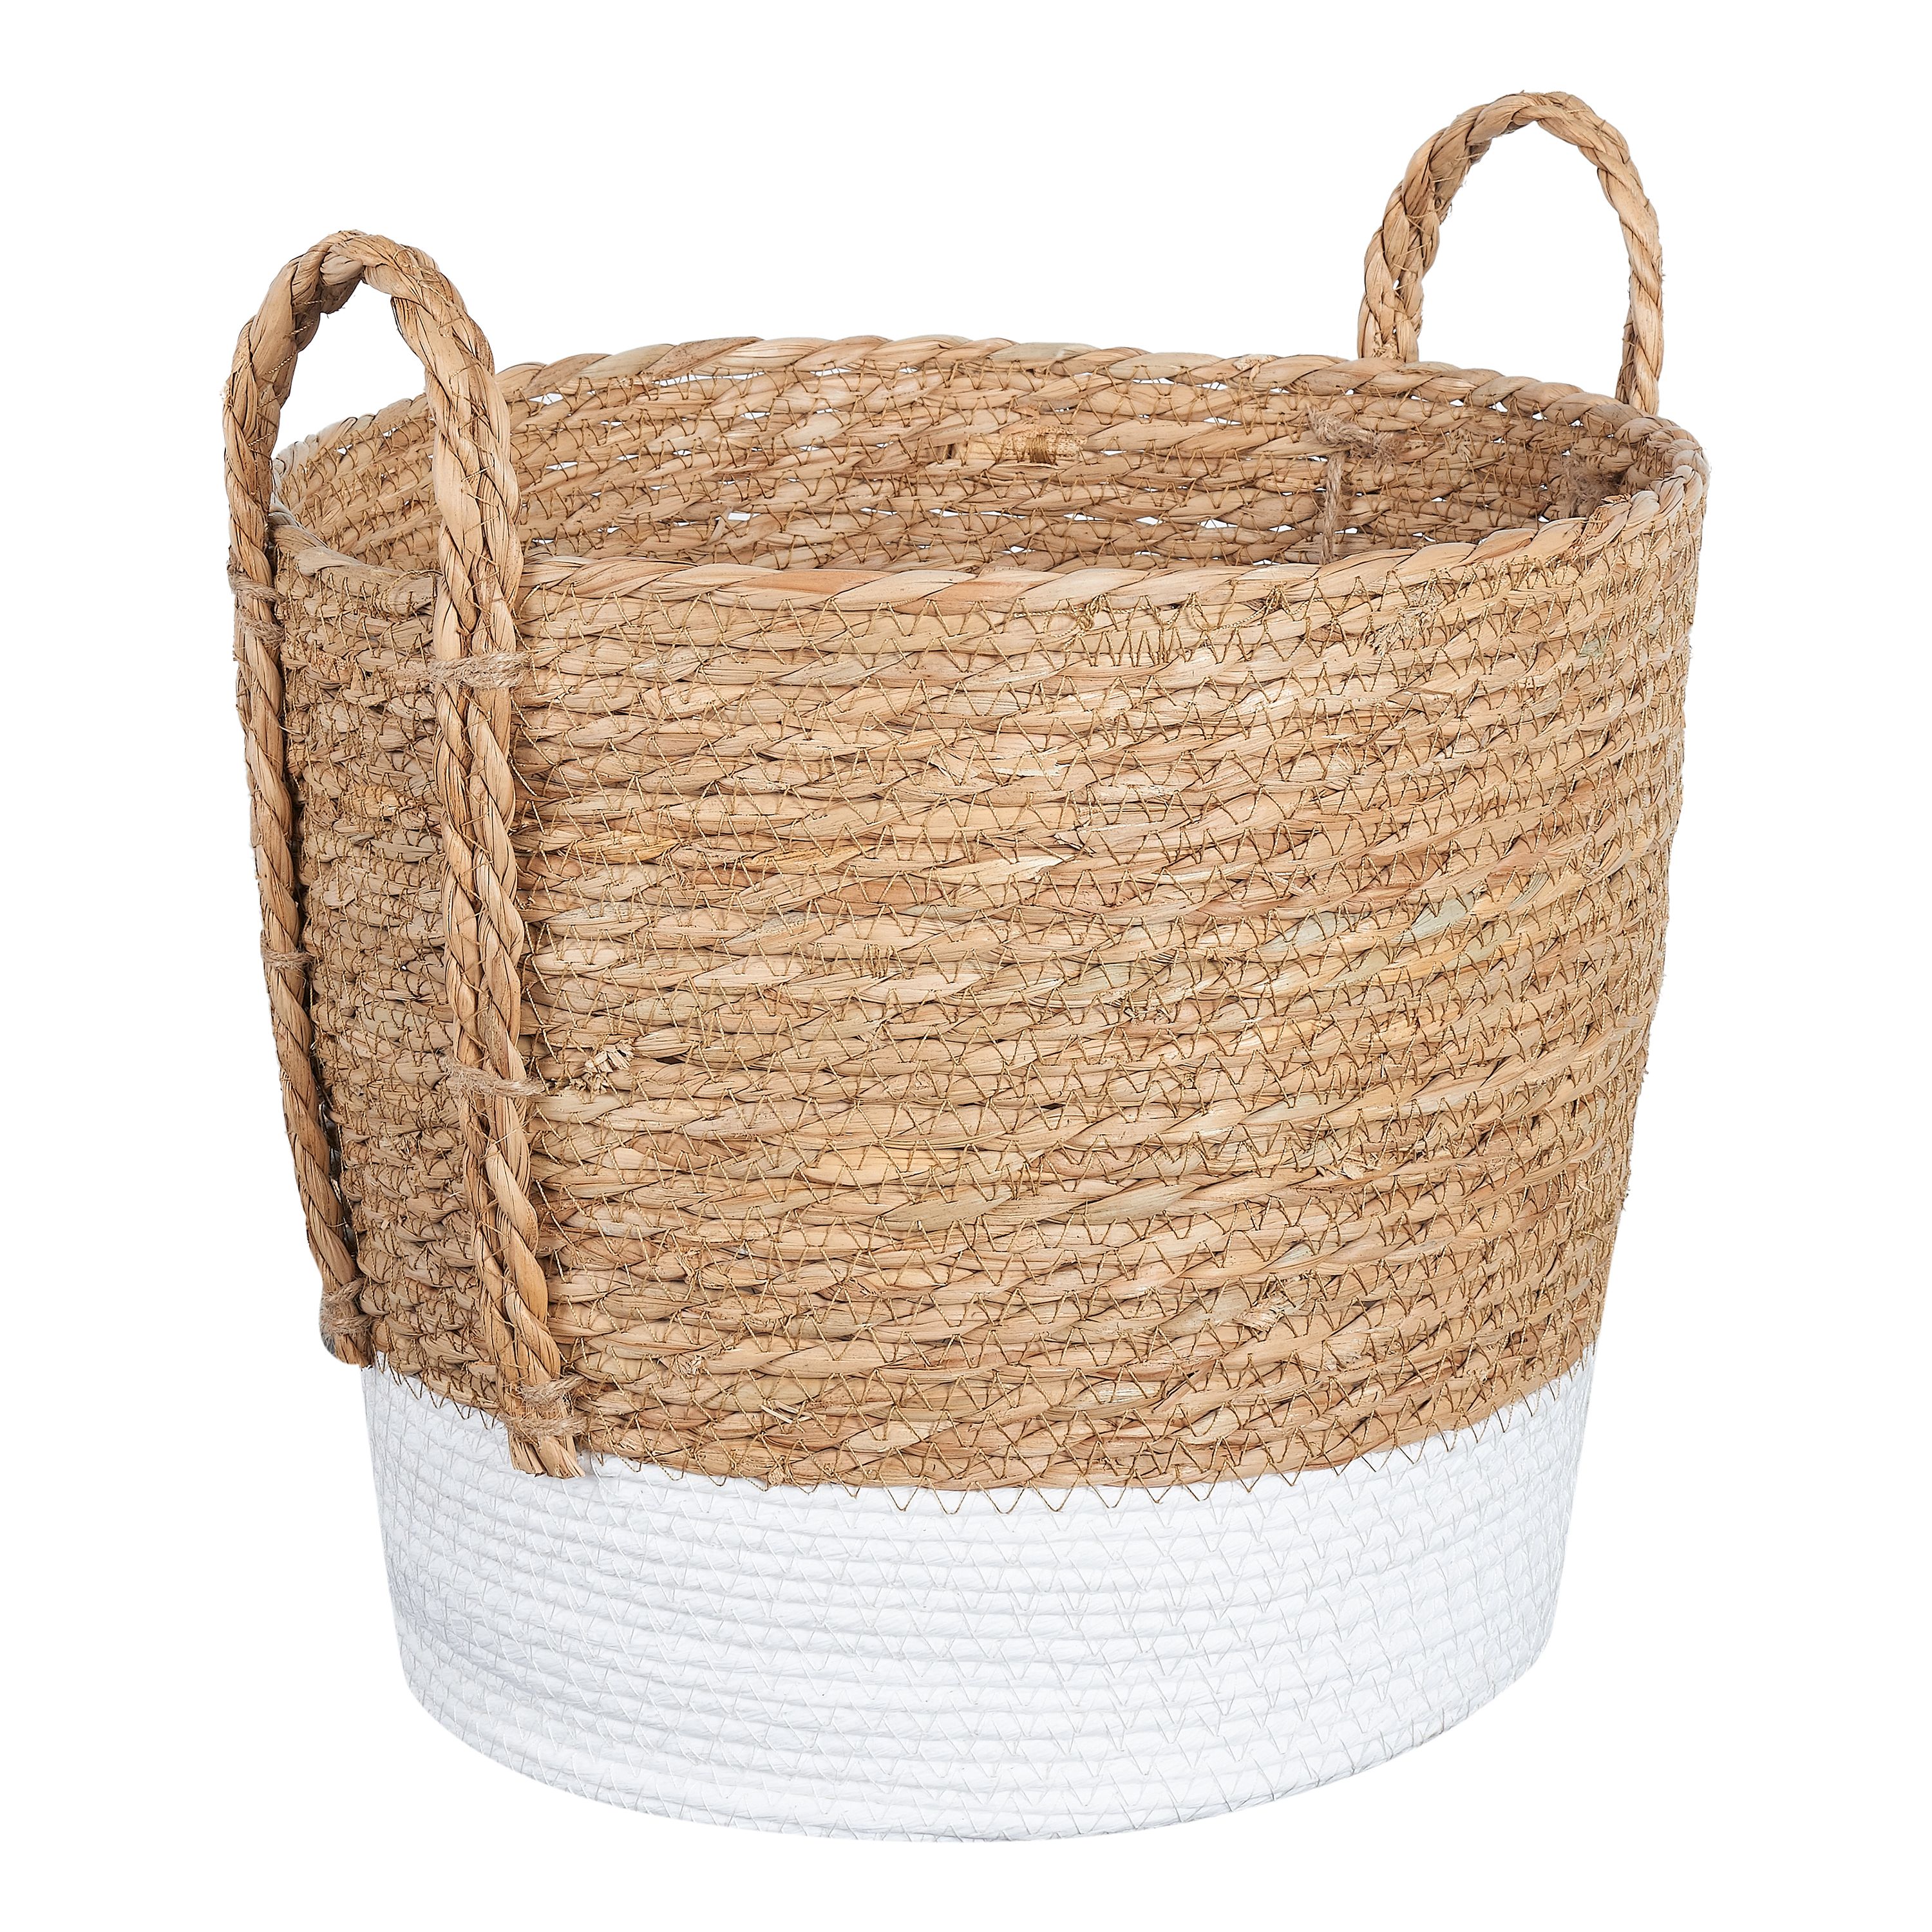 Mainstays Seagrass & Paper Rope Baskets, Set of 2, Small and Medium, Storage - image 5 of 6